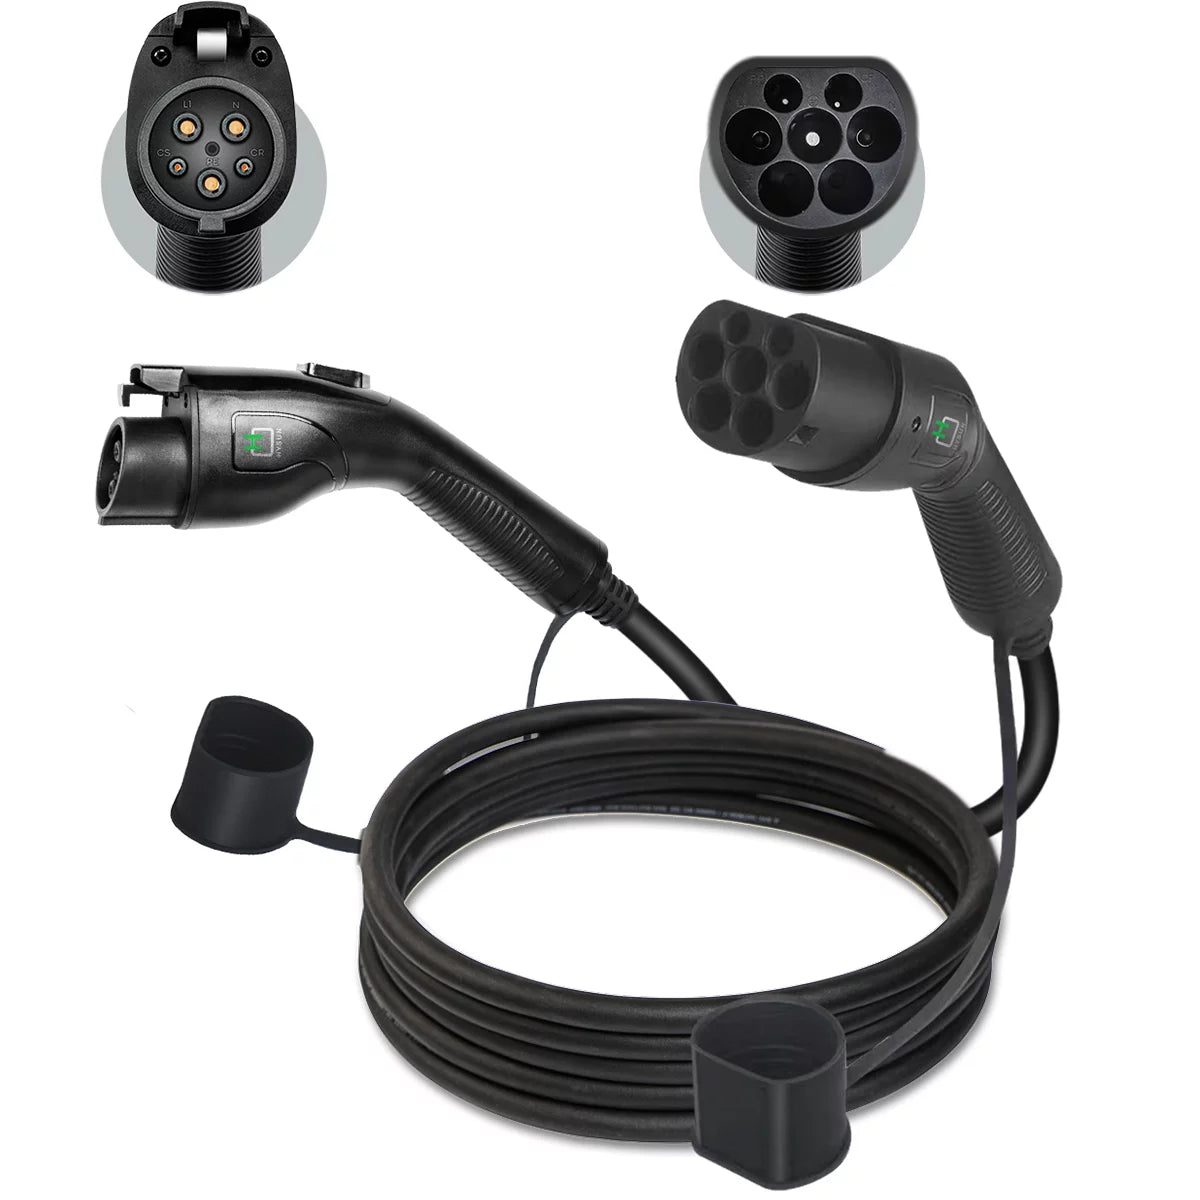 Type 1 to Type 2 EV Charging Cable